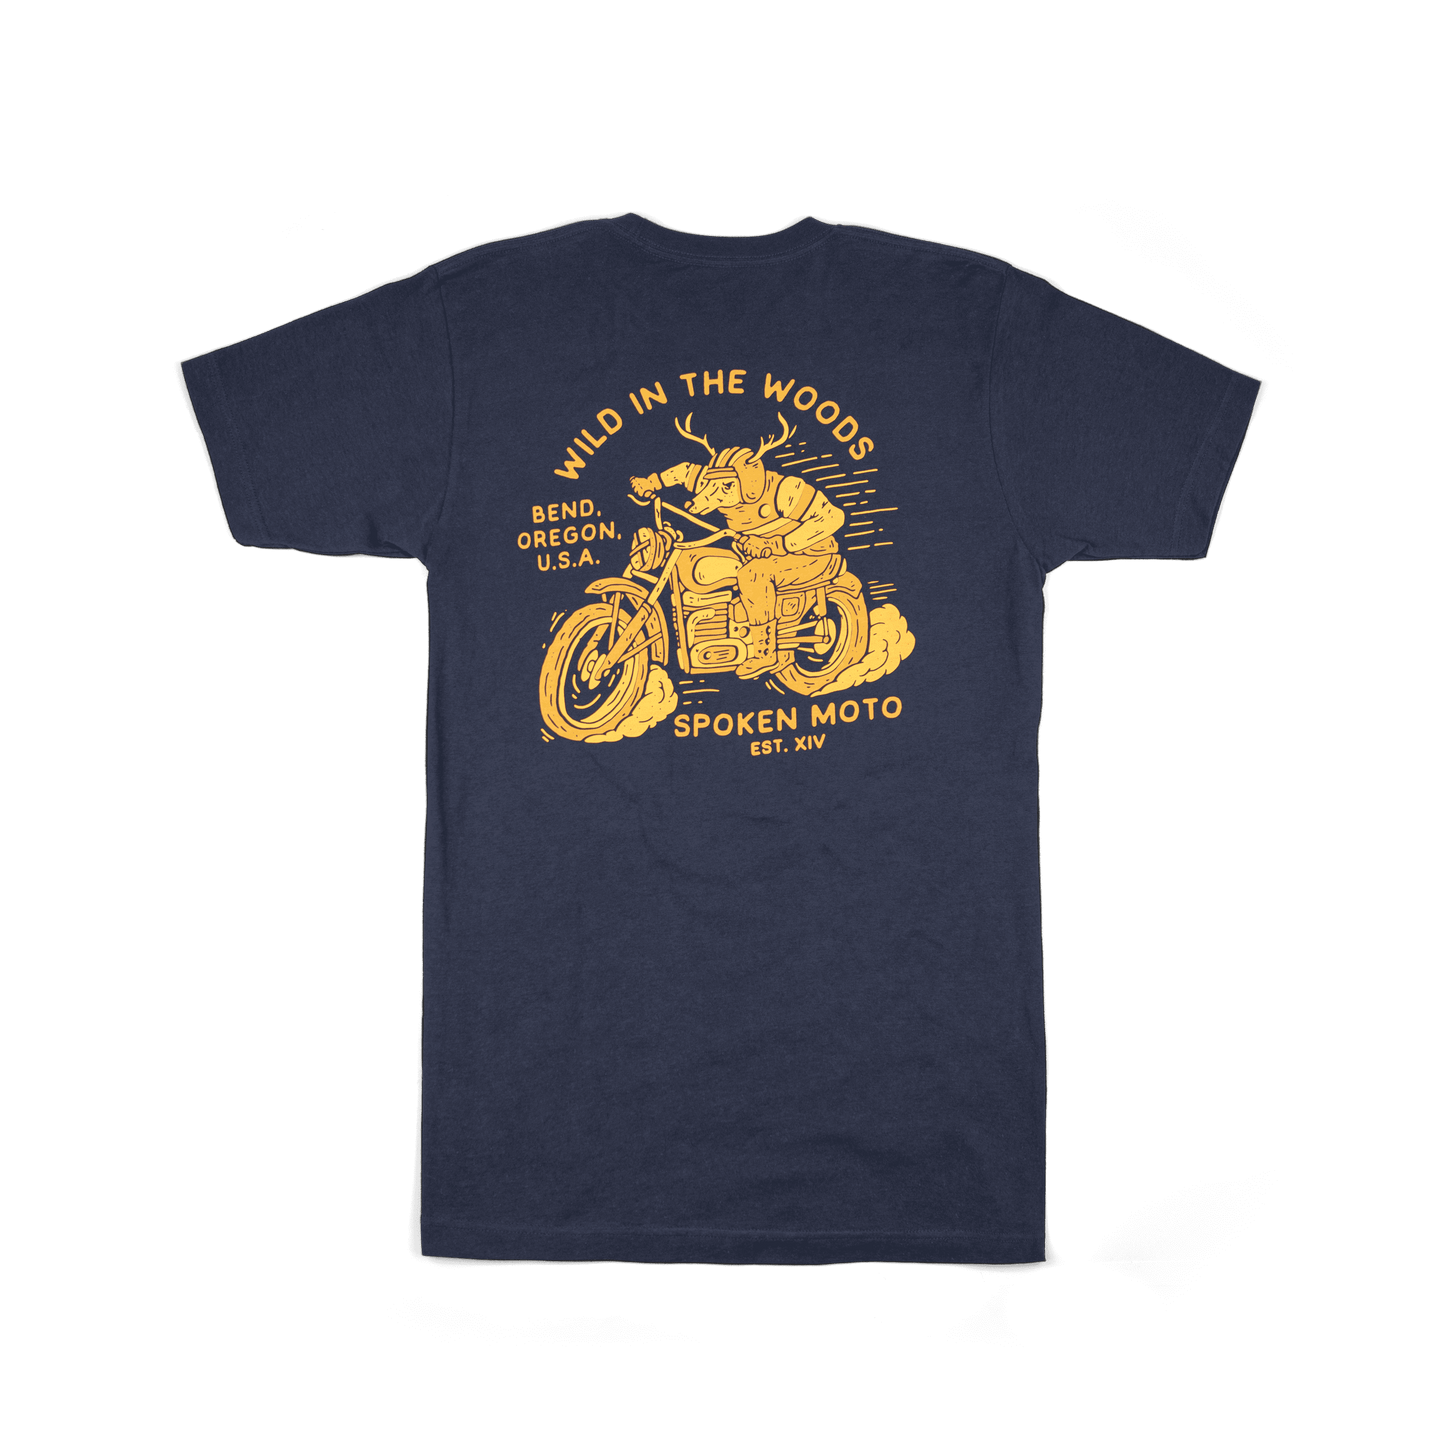 Wild in the Woods Tee from the back - navy blue tee with yellow/gold Wild in the Woods deer riding a motor cycle.